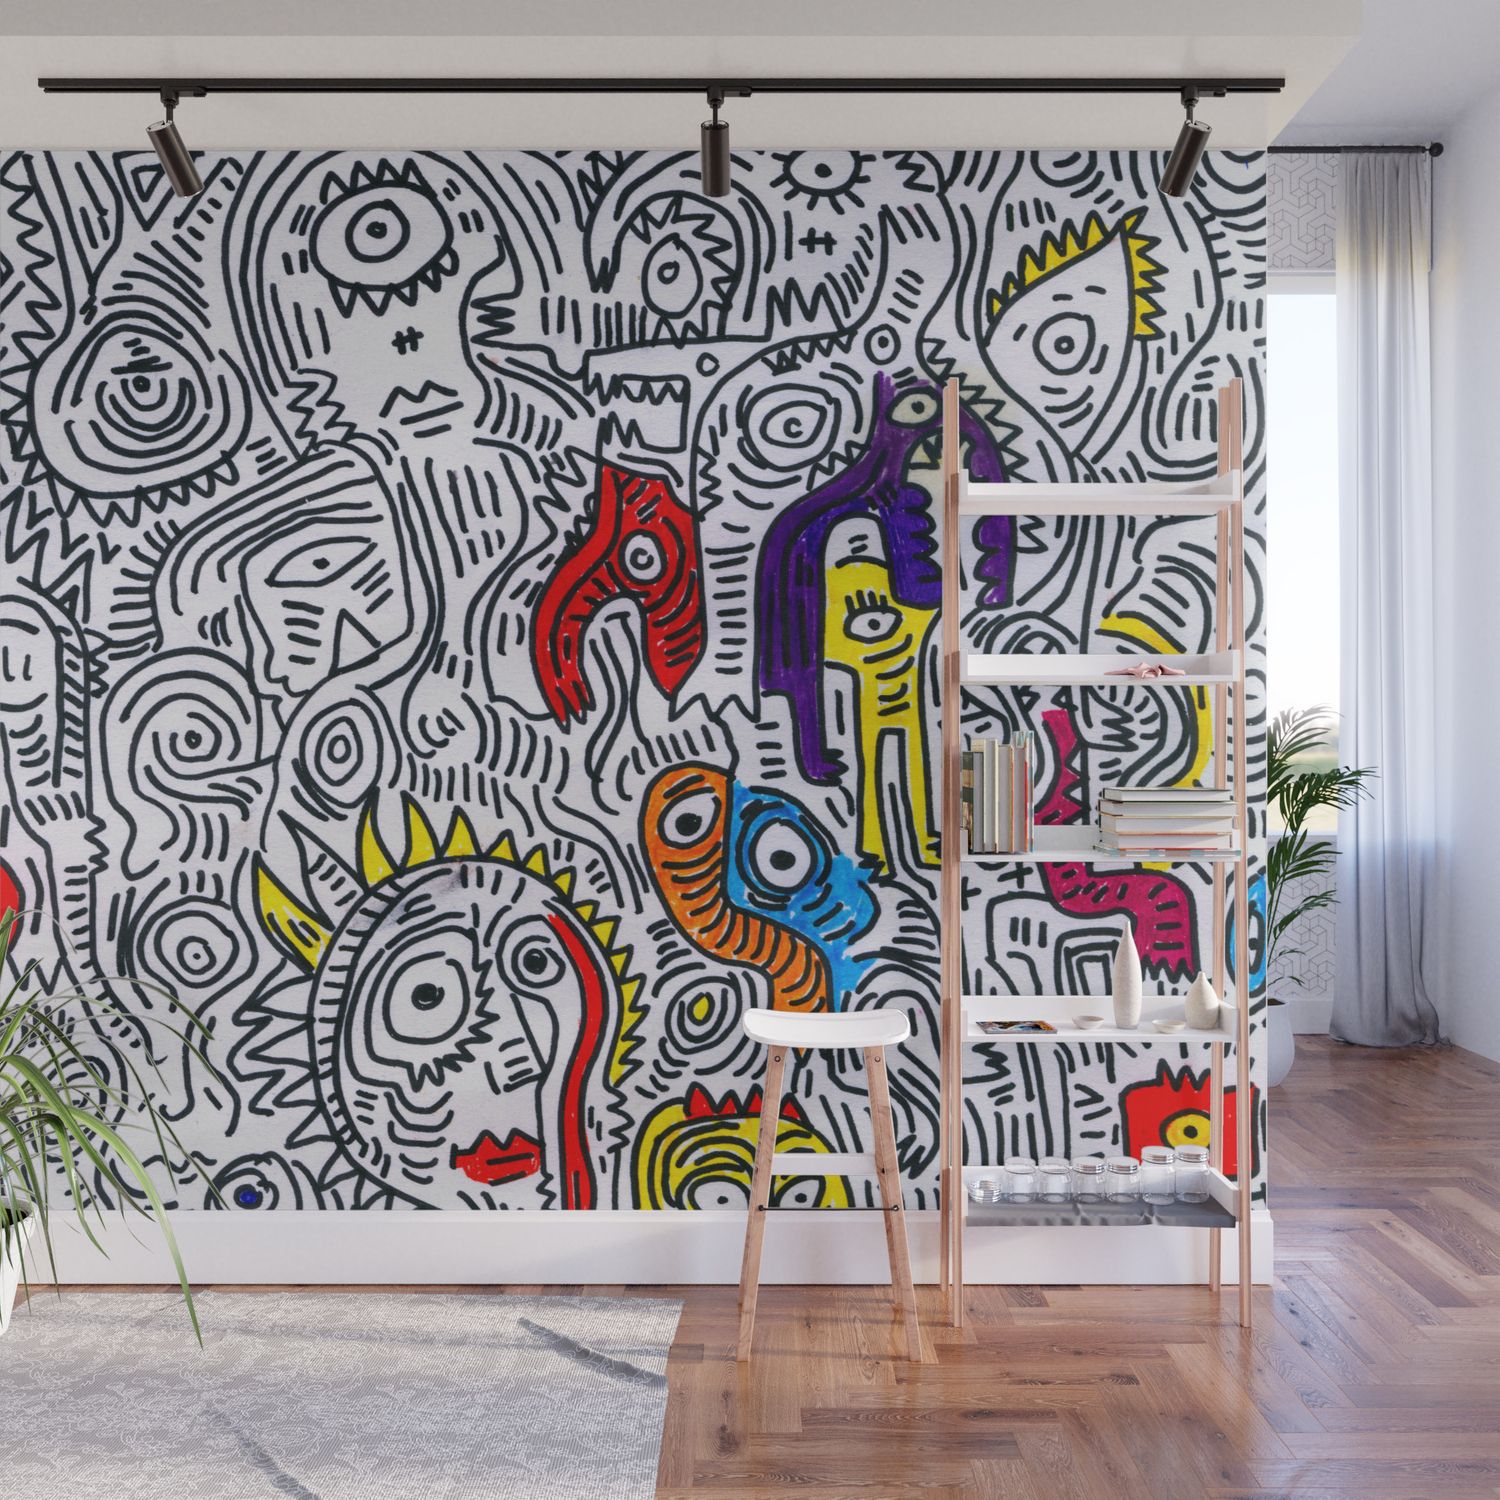 Pattern Doddle Hand Drawn Black And White Colors Street Art Wall Mural Emmanuel Signorino | Society6 Throughout Hand Drawn Wall Art (View 5 of 15)